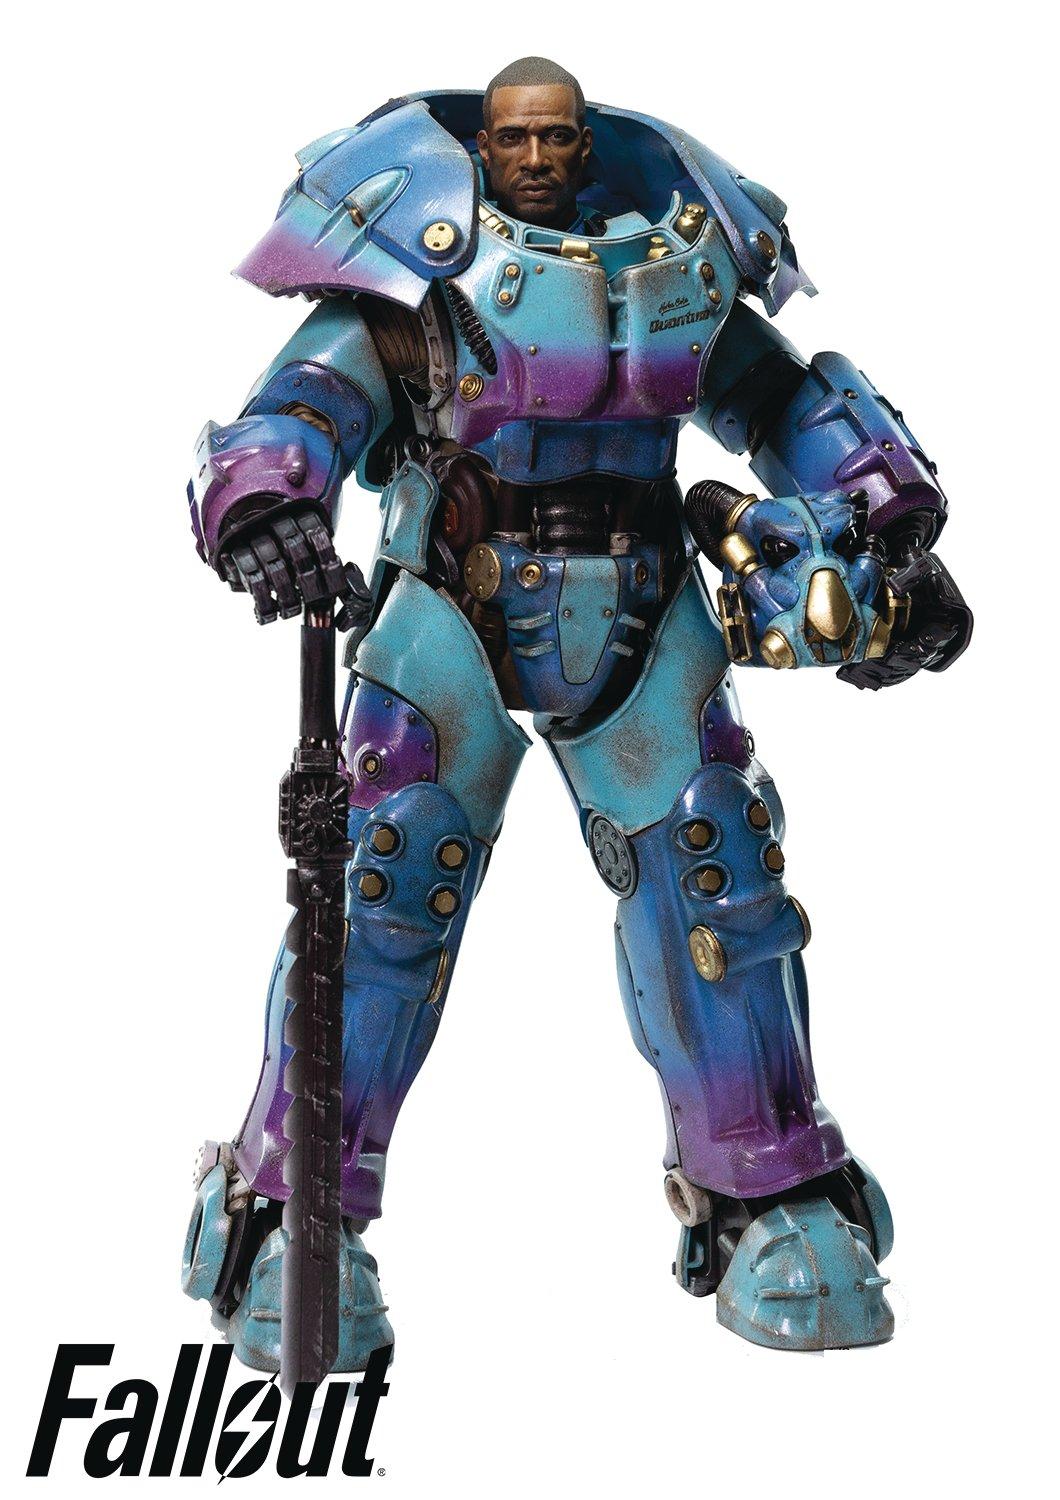 Fallout X 01 Power Armor Quantum Variant Figure Only At Gamestop Gamestop